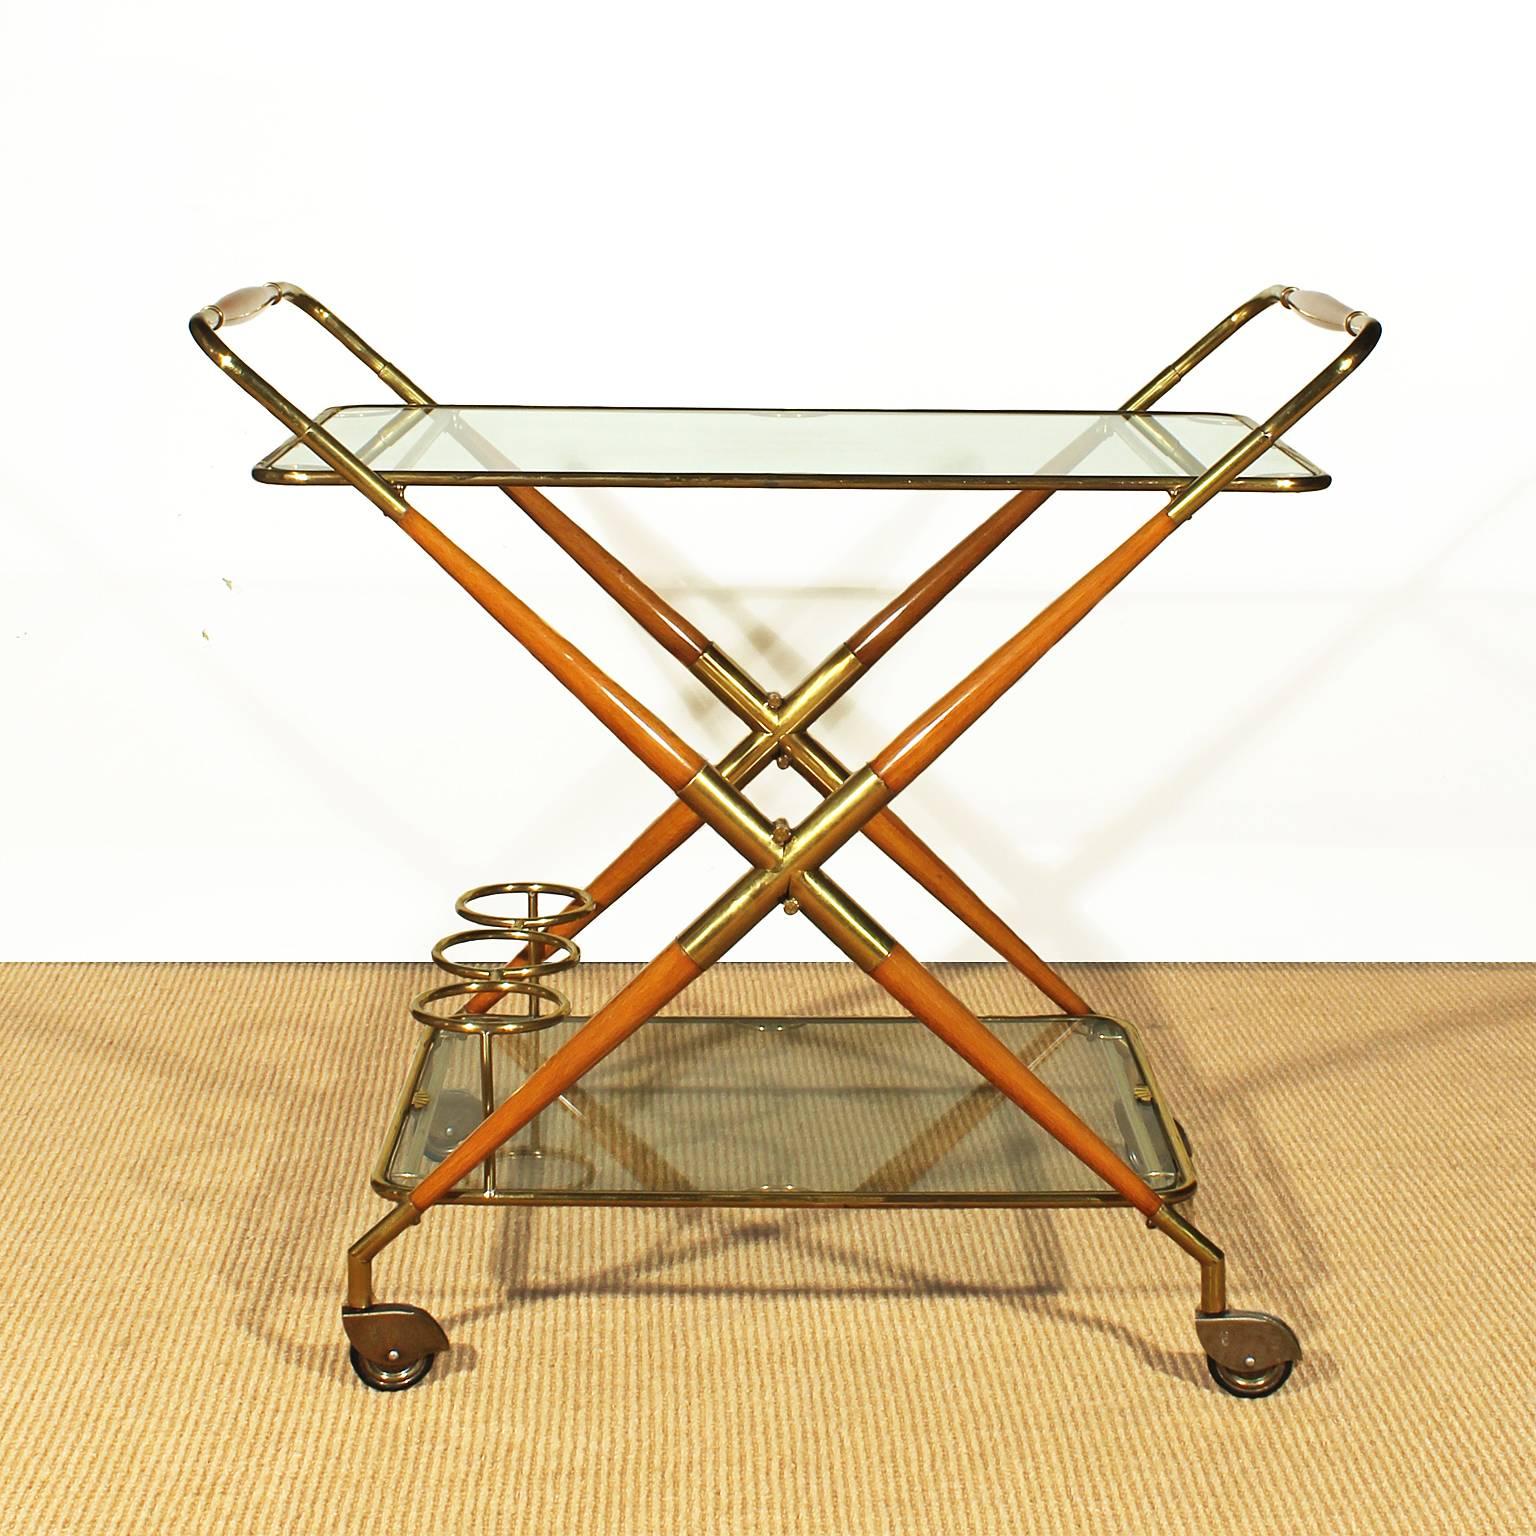 Foldable bar cart, solid beechwood, French polish, brass and glass two removable trays,

Italy, circa 1950.